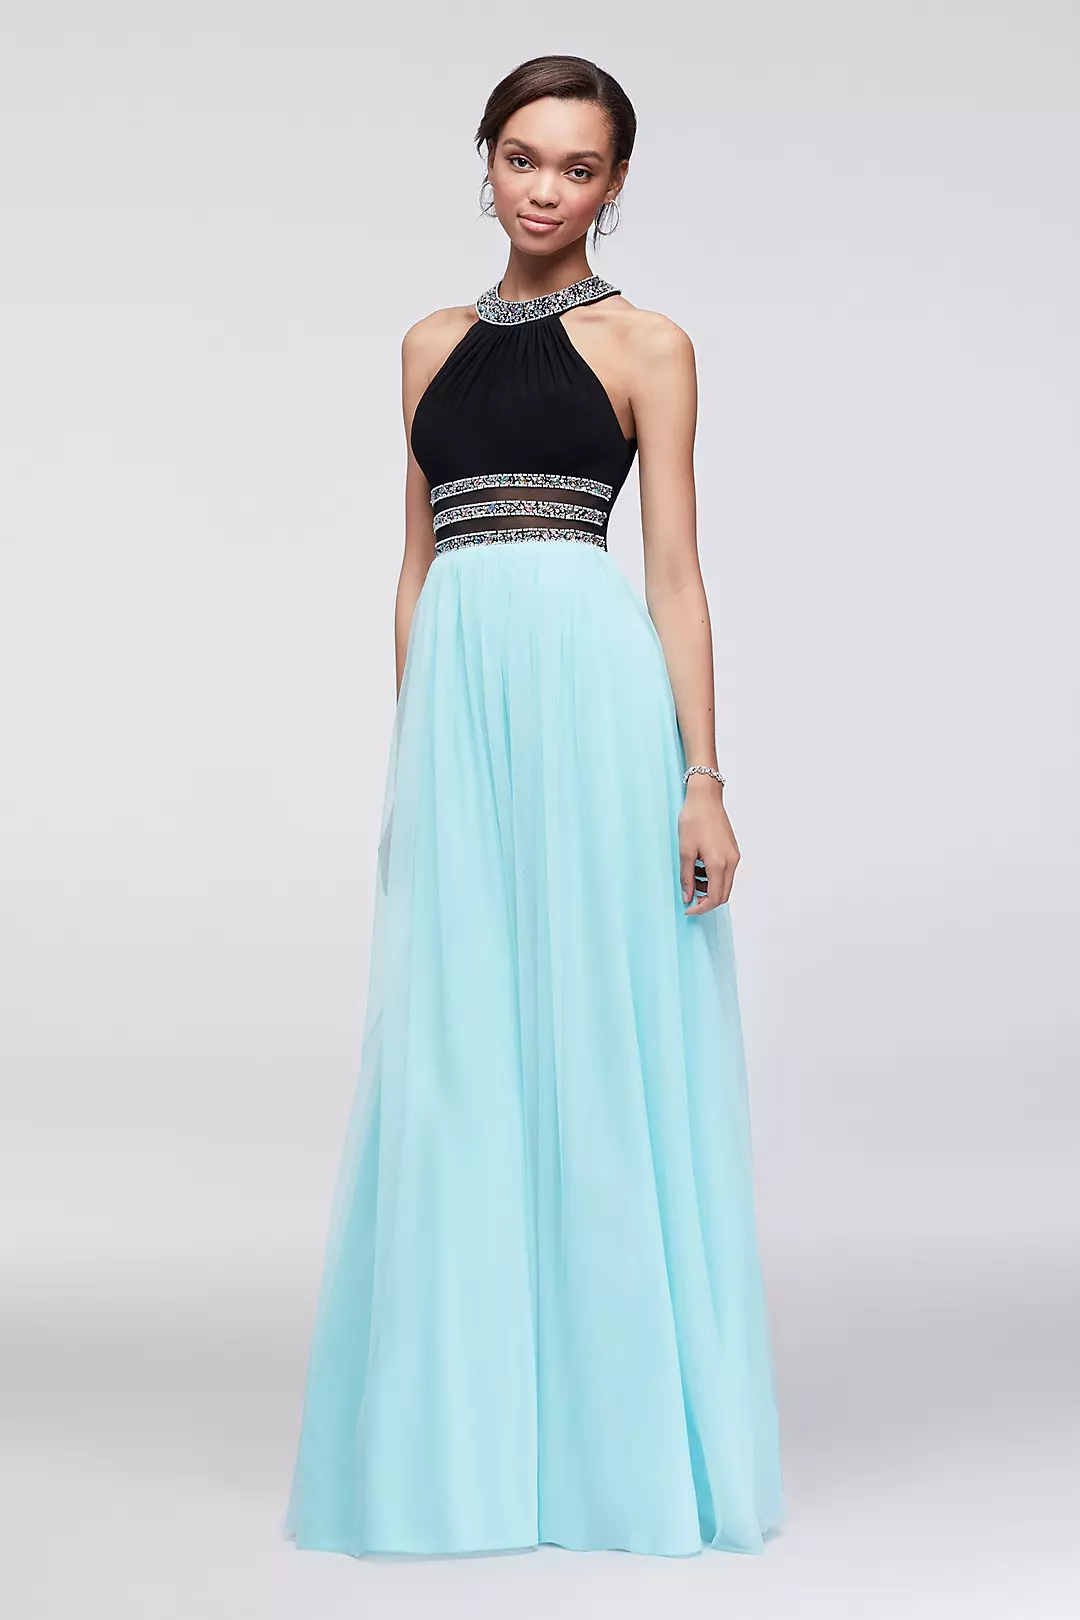 Two-Tone Halter Dress with Beaded Waist Image